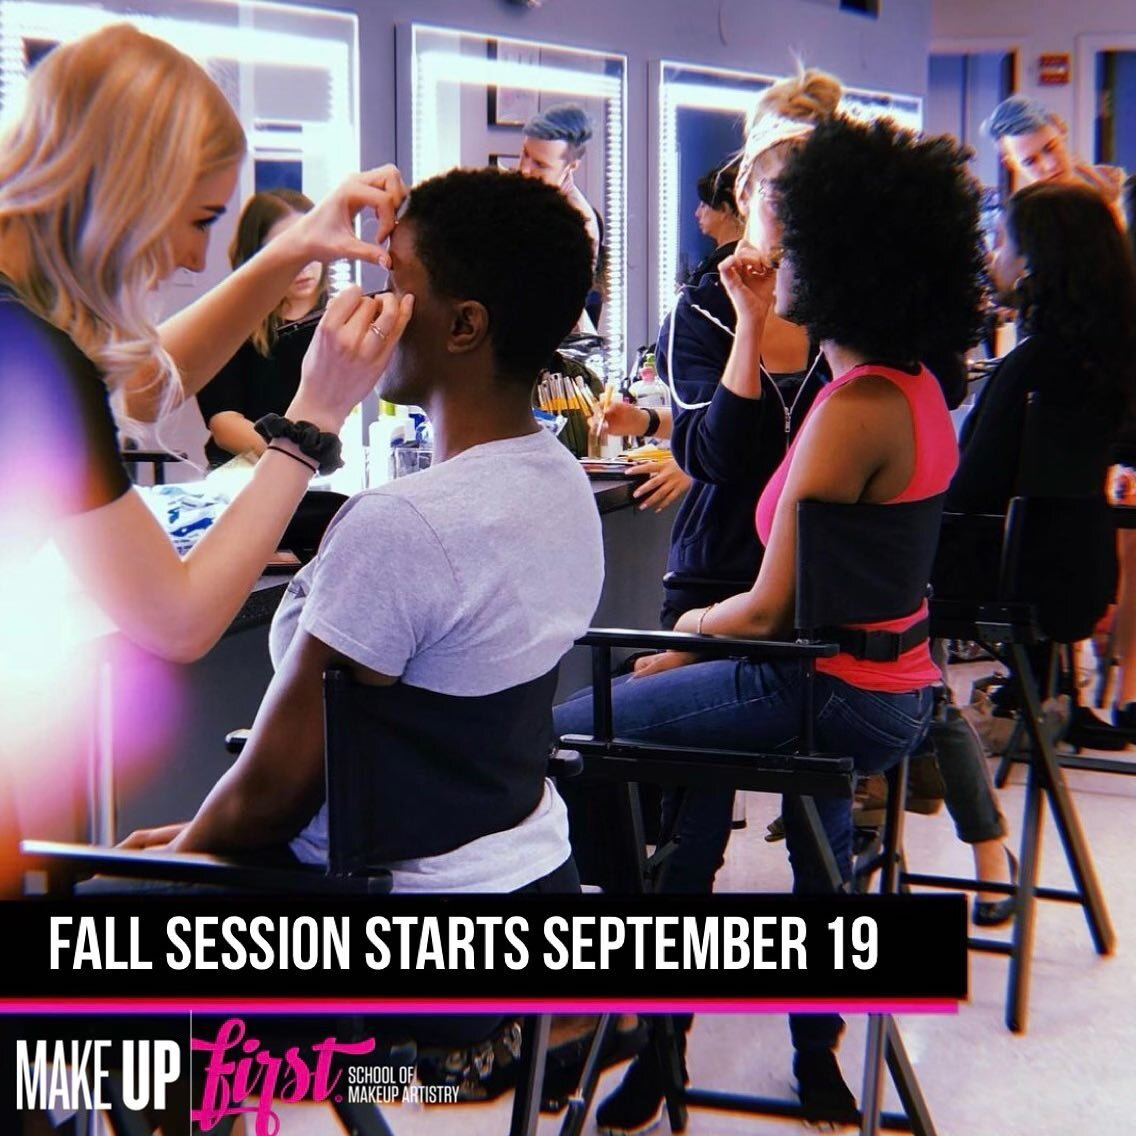 We&rsquo;re coming to Naperville! Make Up First&reg; is well known in the makeup industry and is recognized for building the careers of famous celebrity artists around the world. We have trained thousands of successful artists in our original locatio